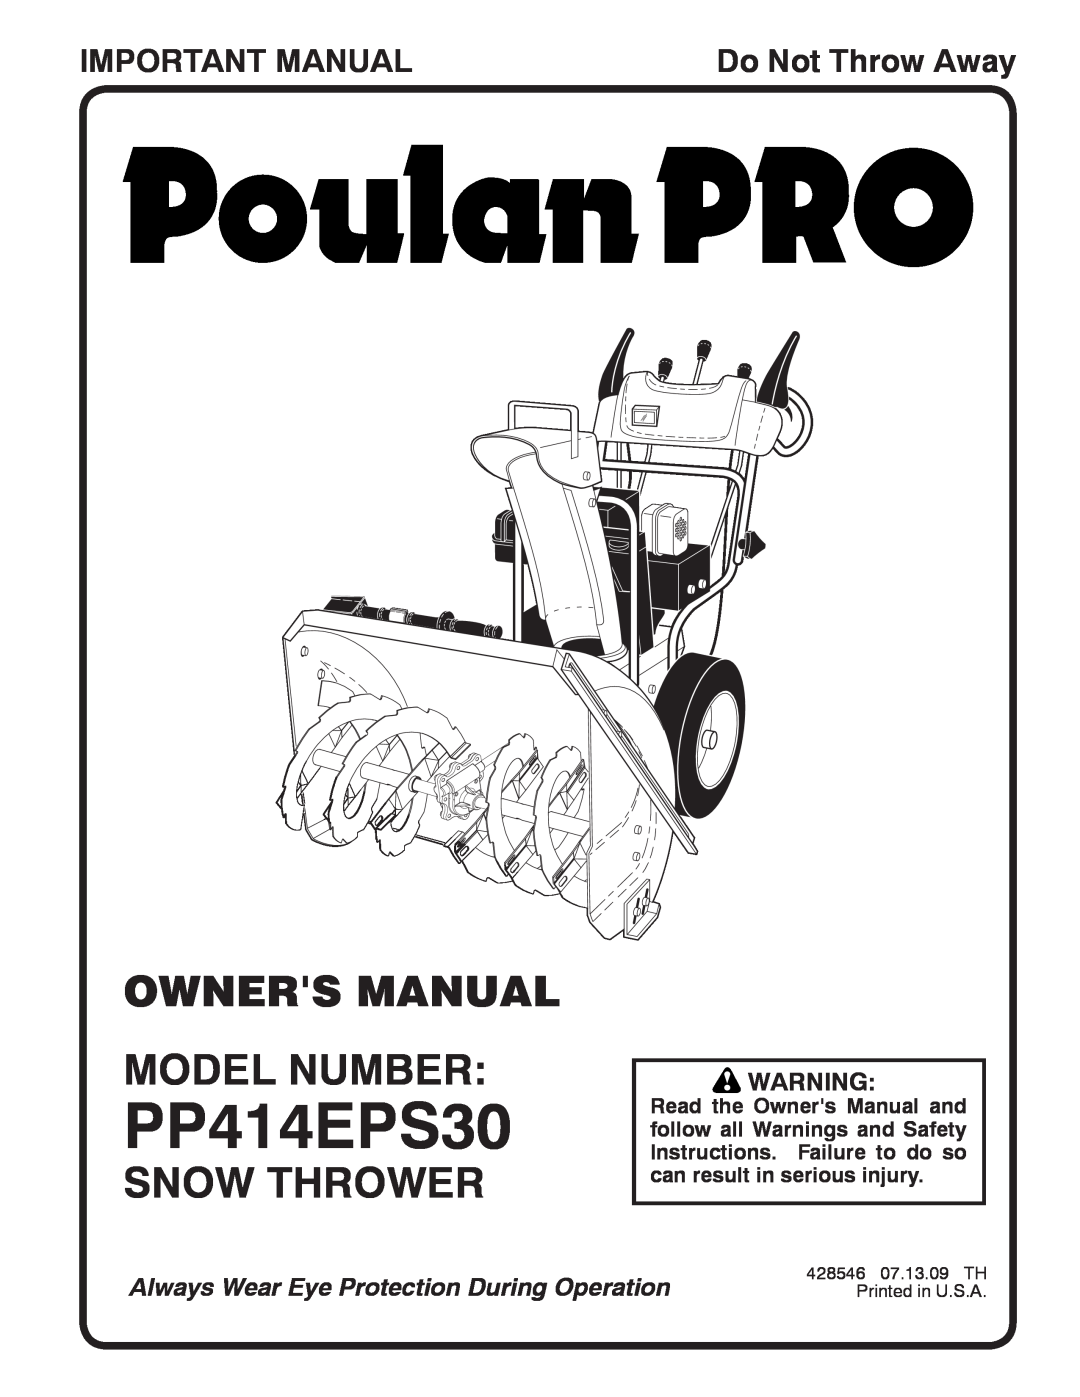 Poulan PP414EPS30 owner manual Snow Thrower, Important Manual, Do Not Throw Away 